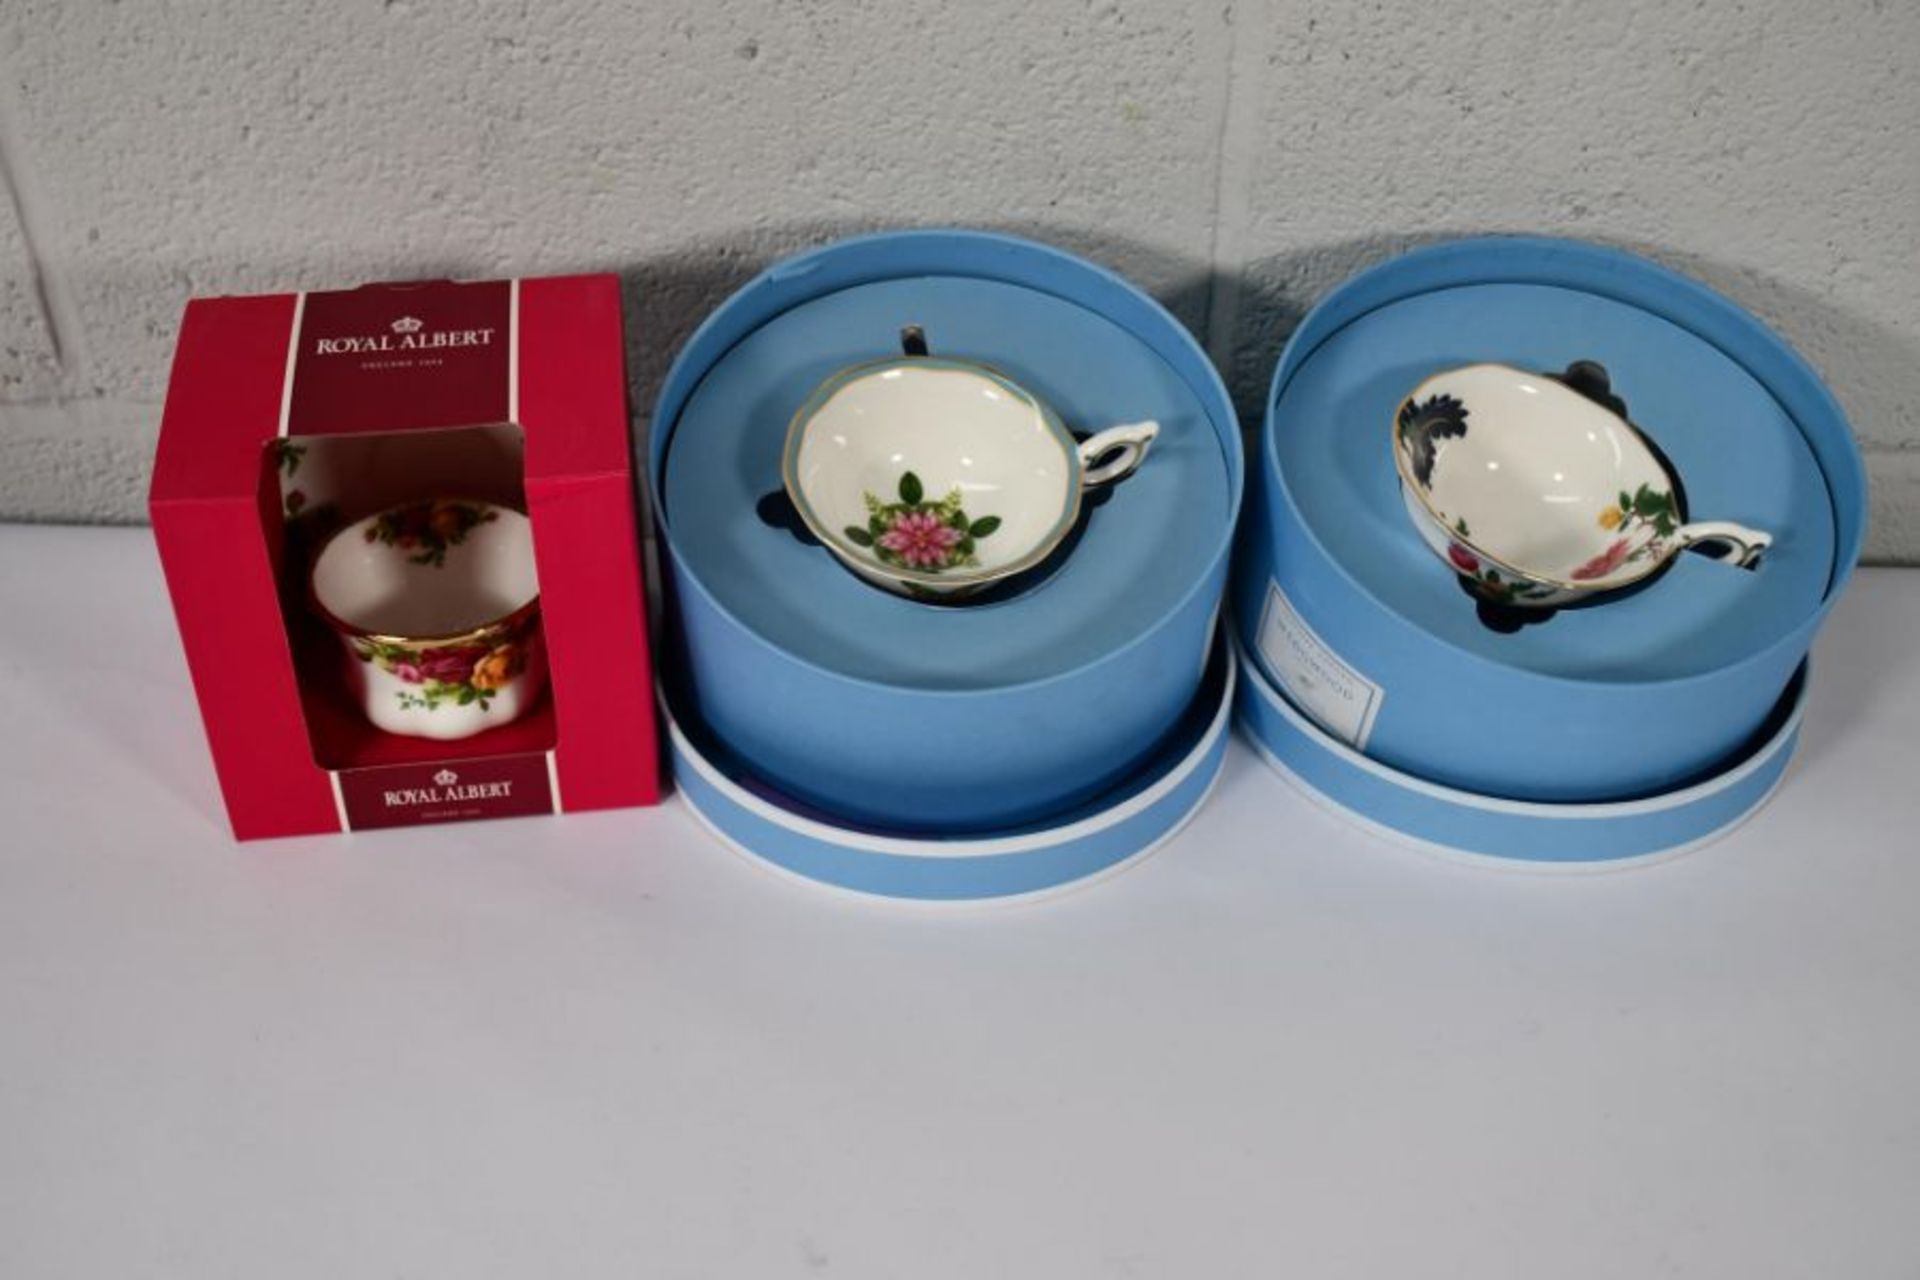 Two as new Wedgwood cup and saucer boxed sets and a Royal Albert cup and saucer